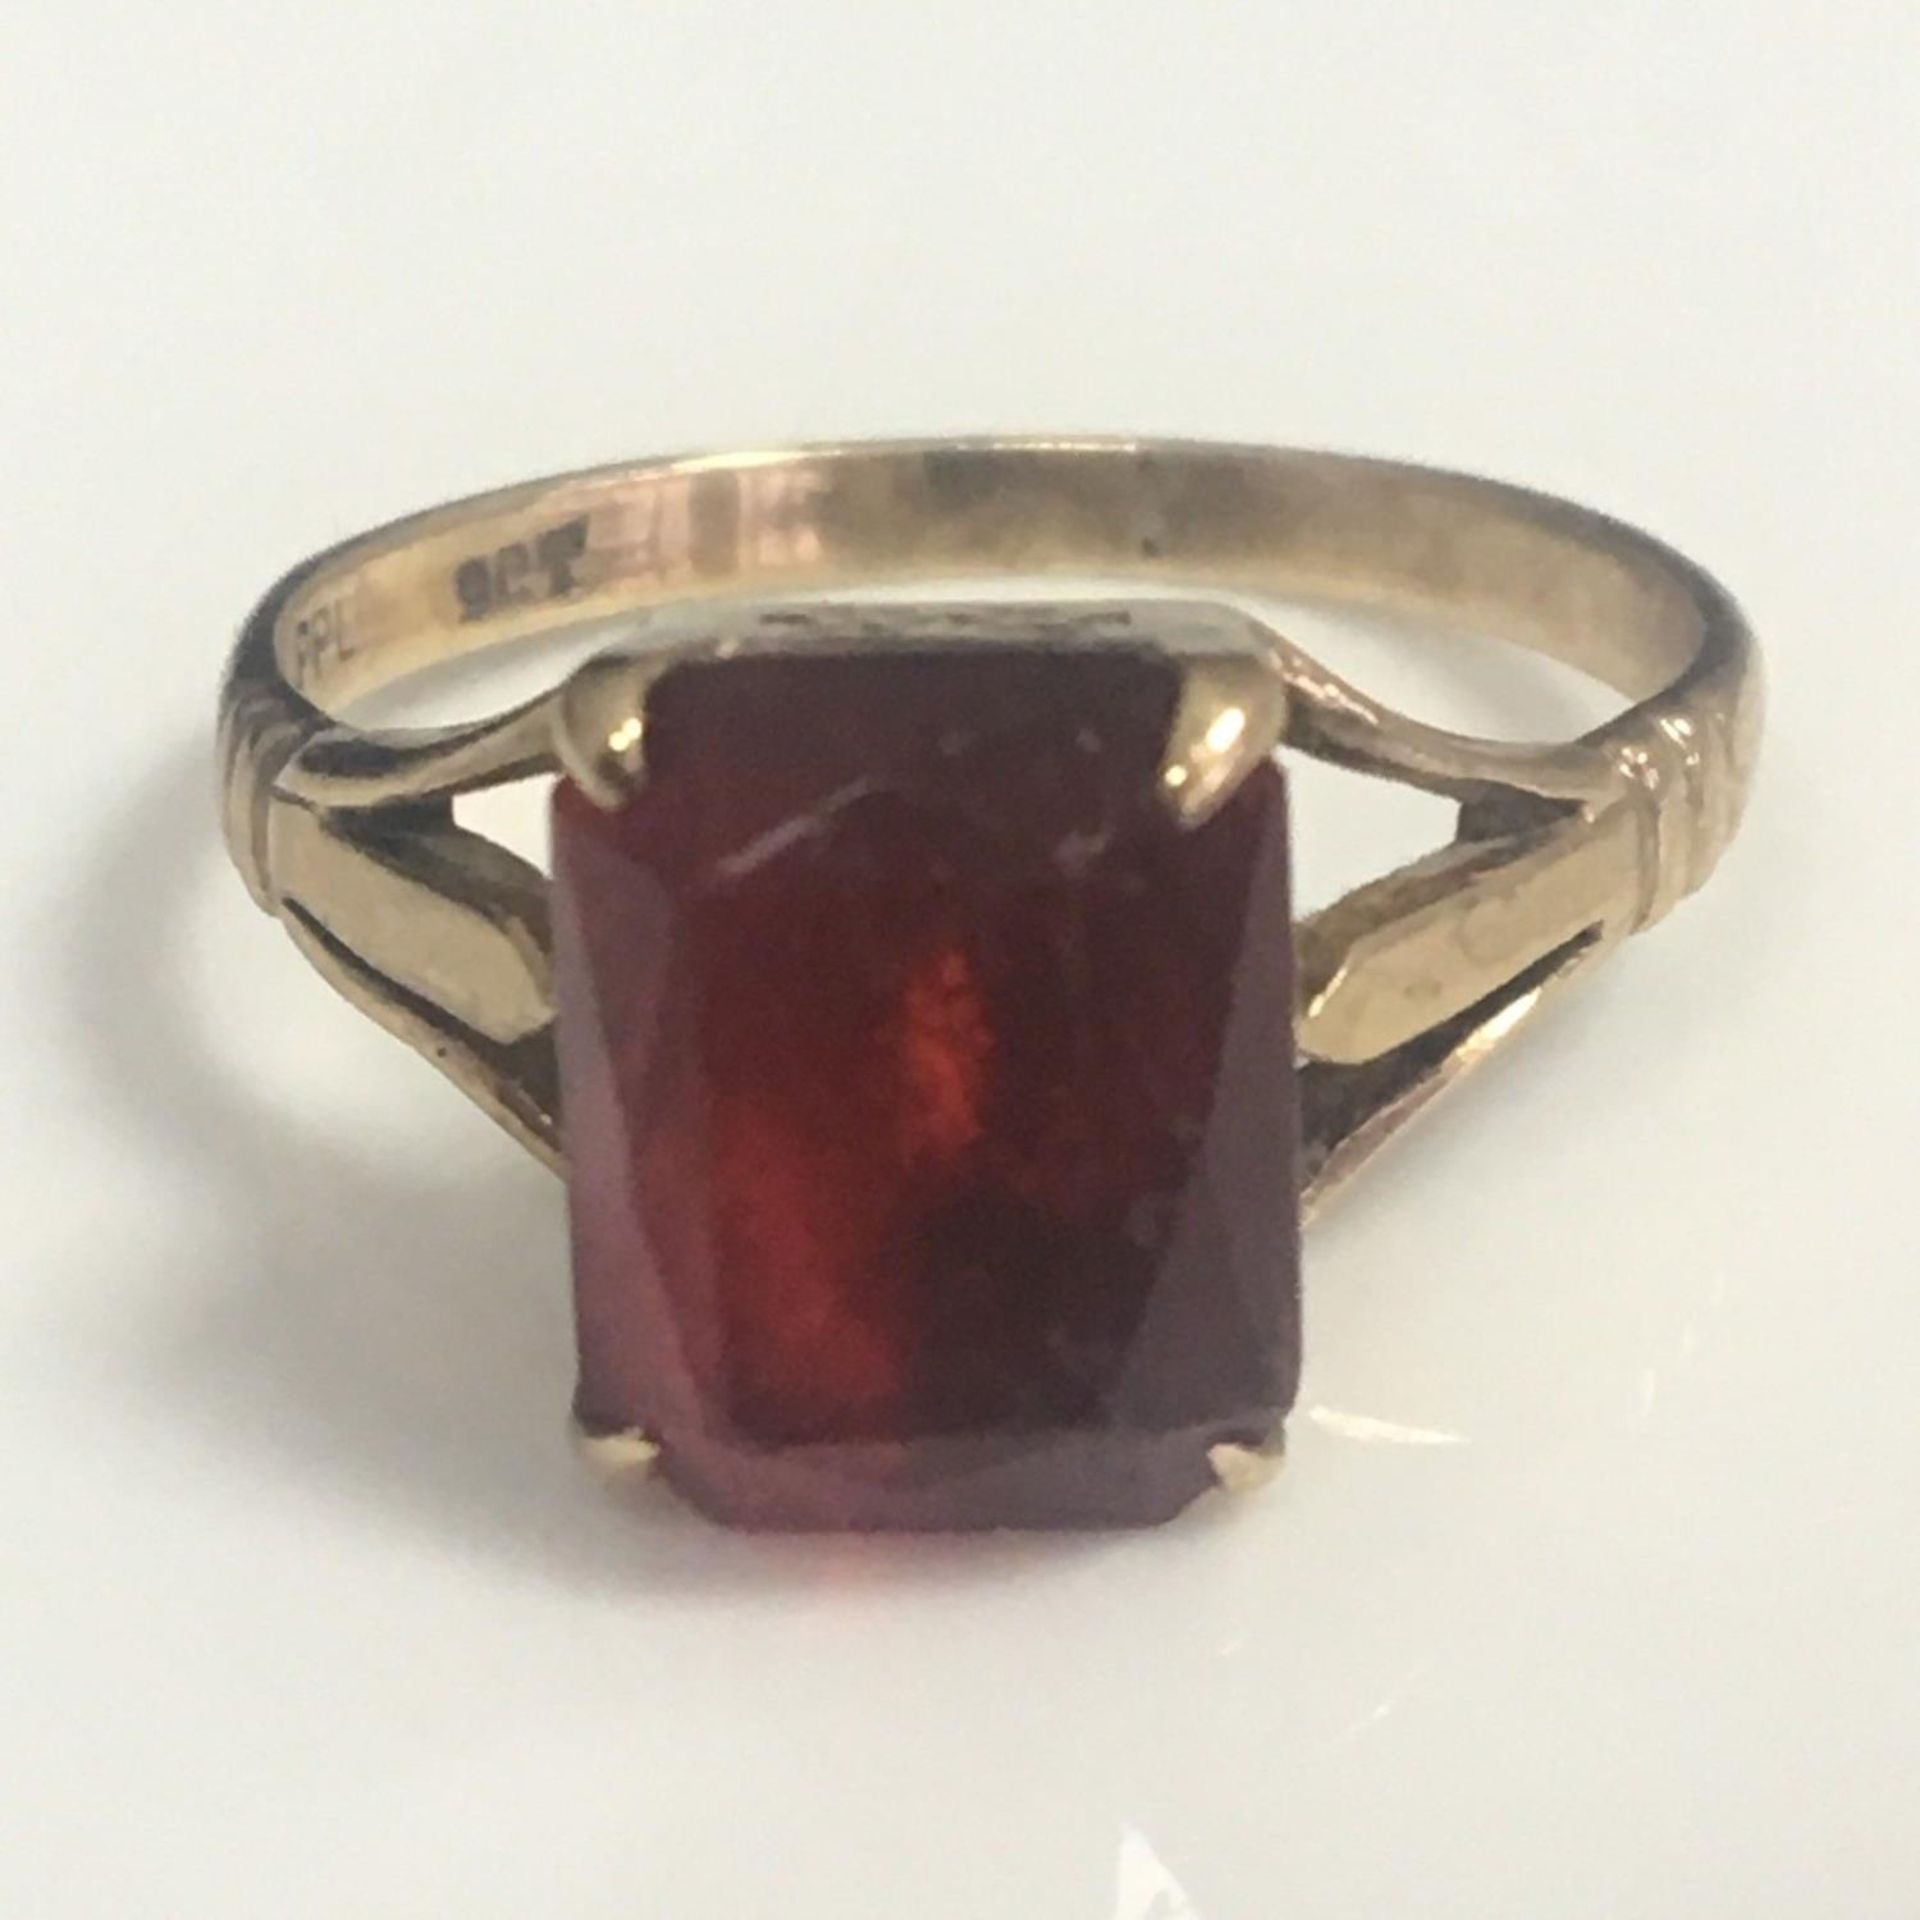 Vintage Art Deco 9ct gold red stone cocktail ring - size O - Image 3 of 3